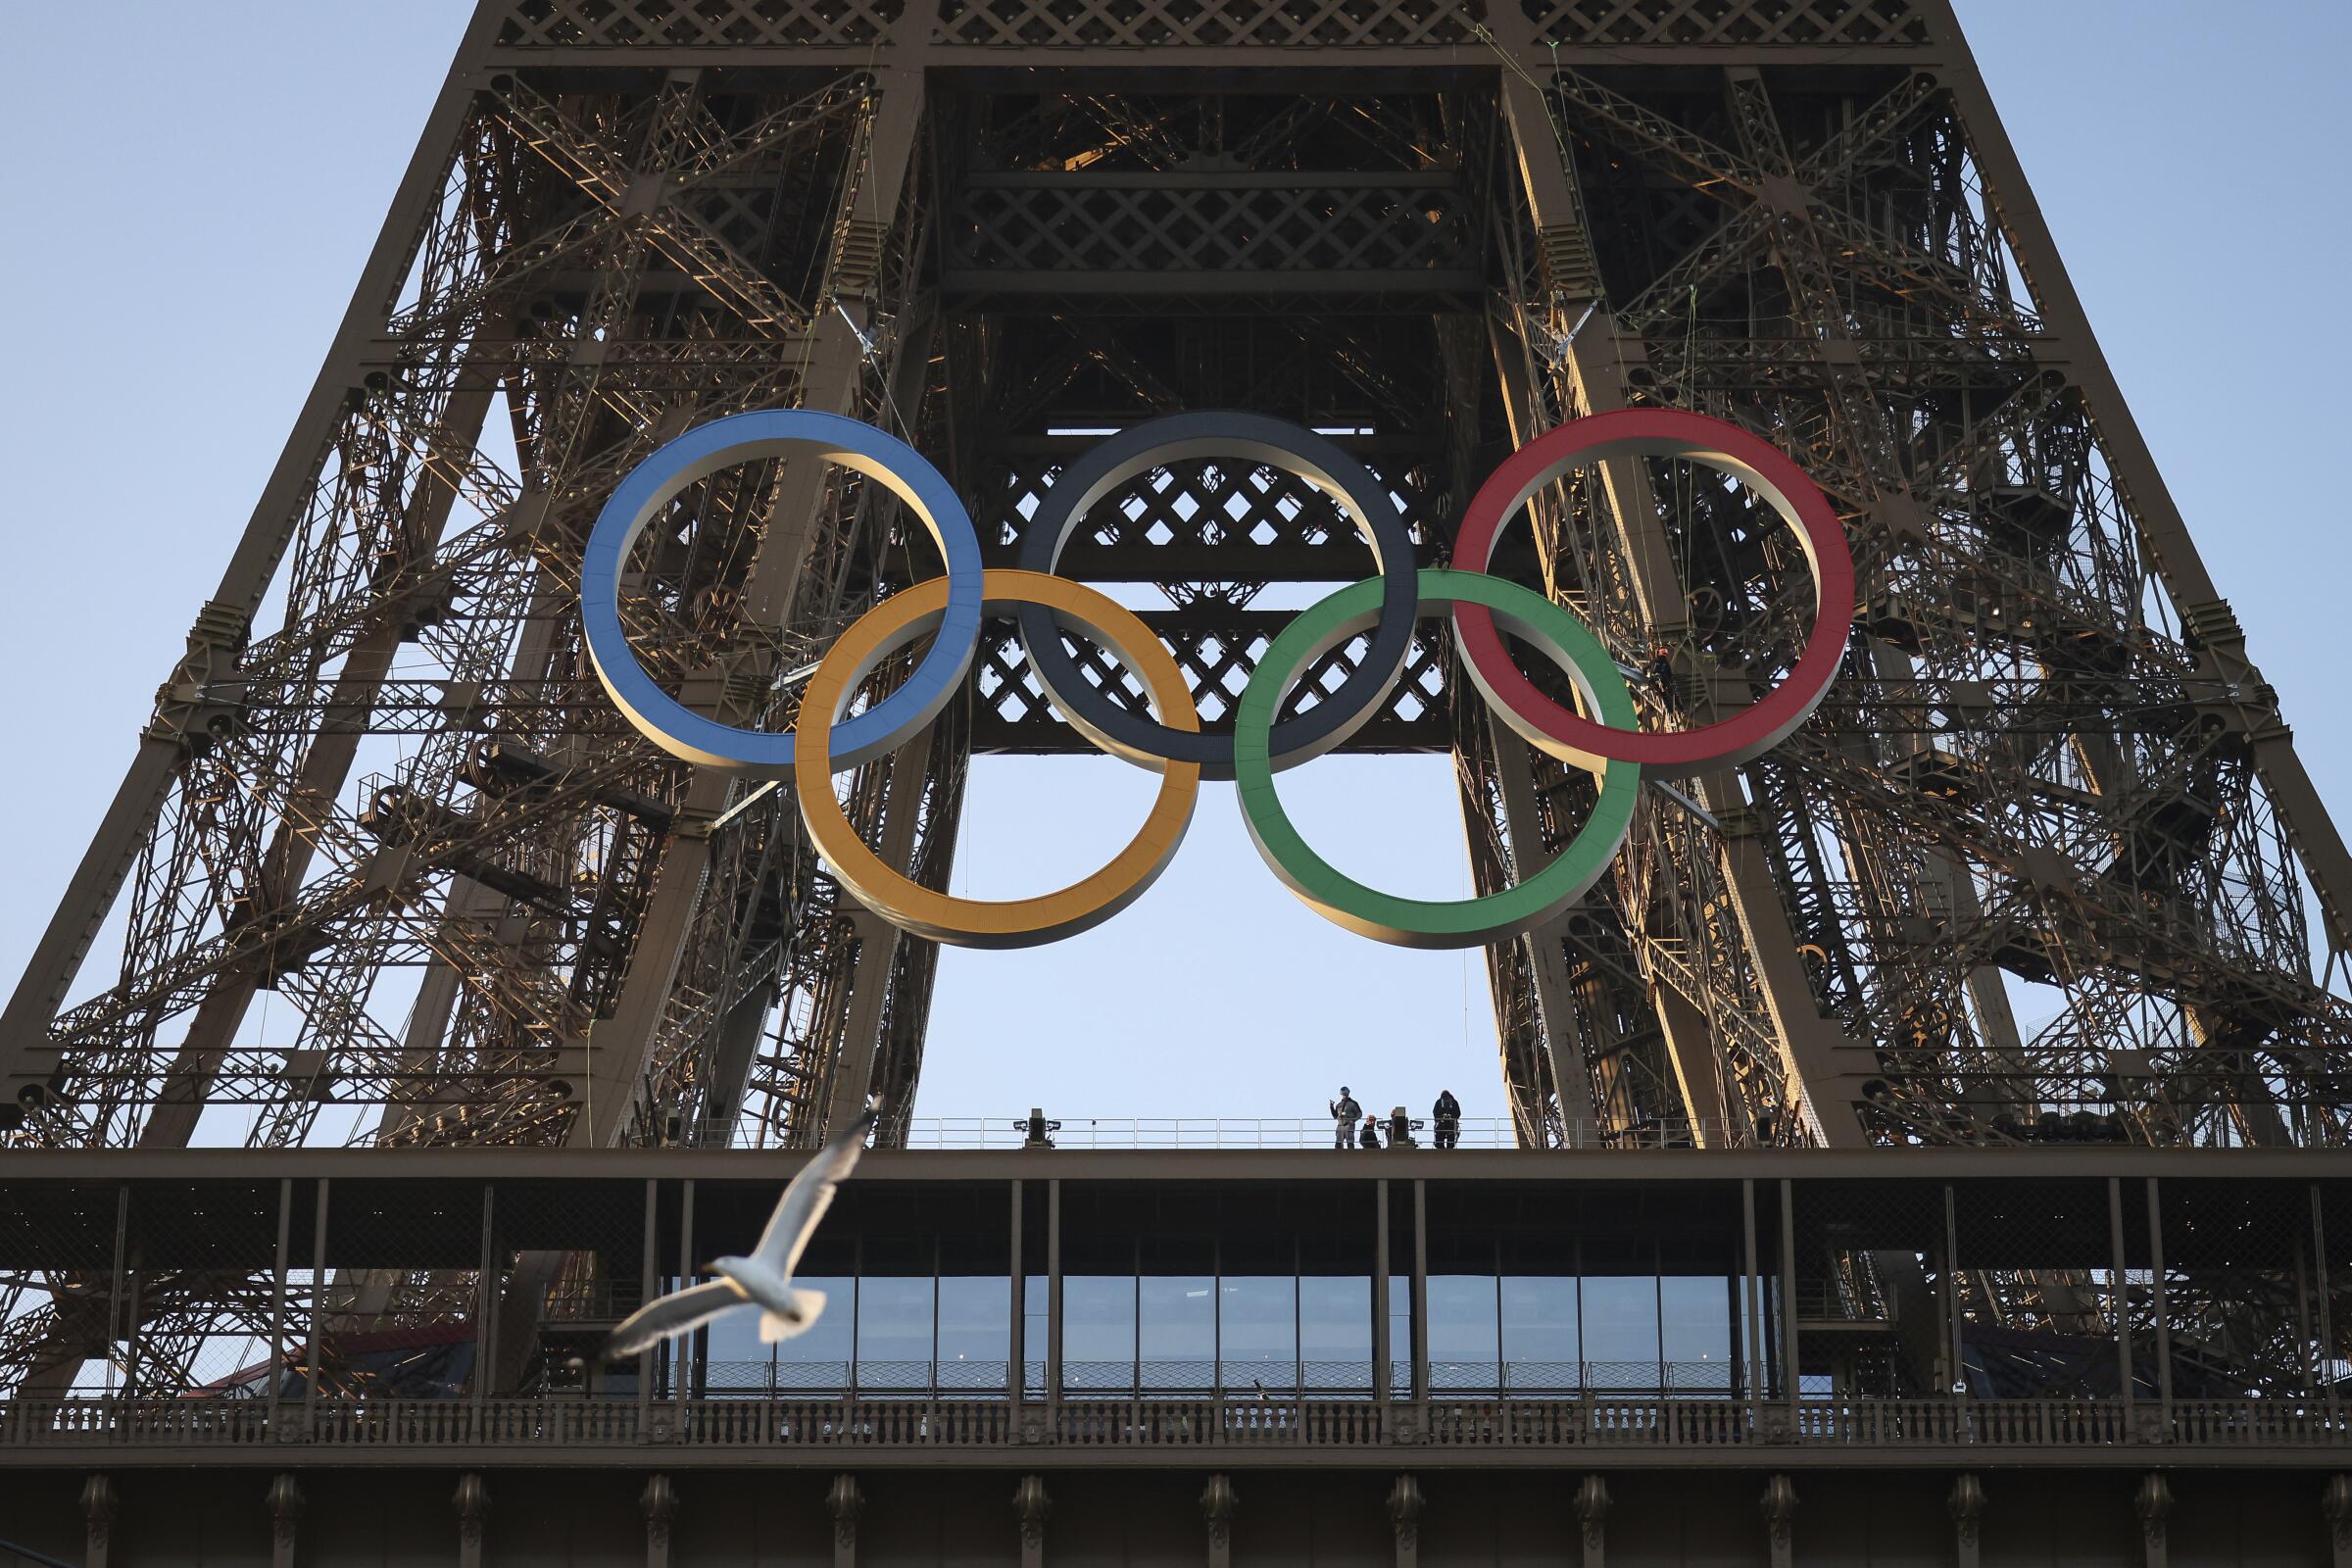 The Olympic rings on display at the Eiffel Tower in Paris.